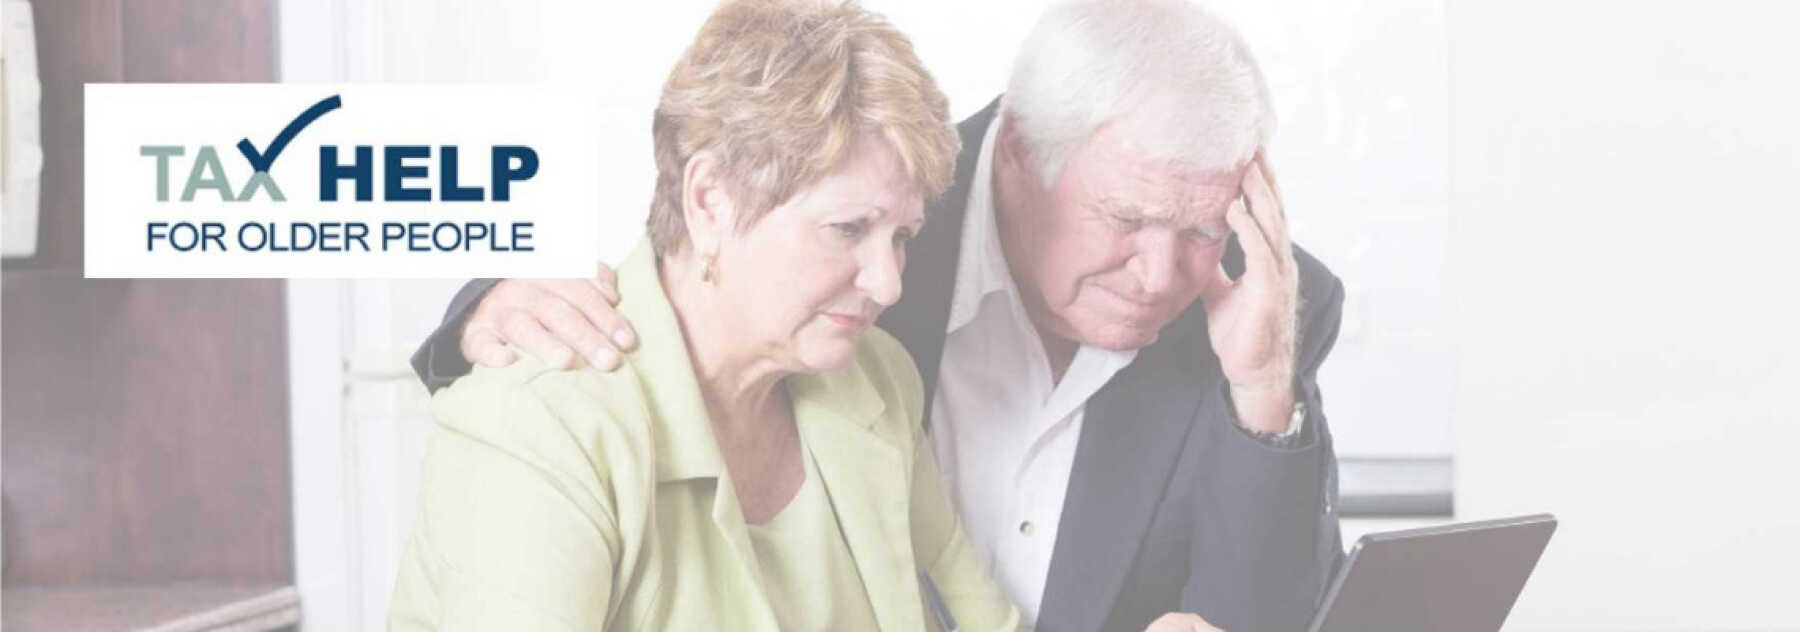 Featured Image for Tax Help for Older People